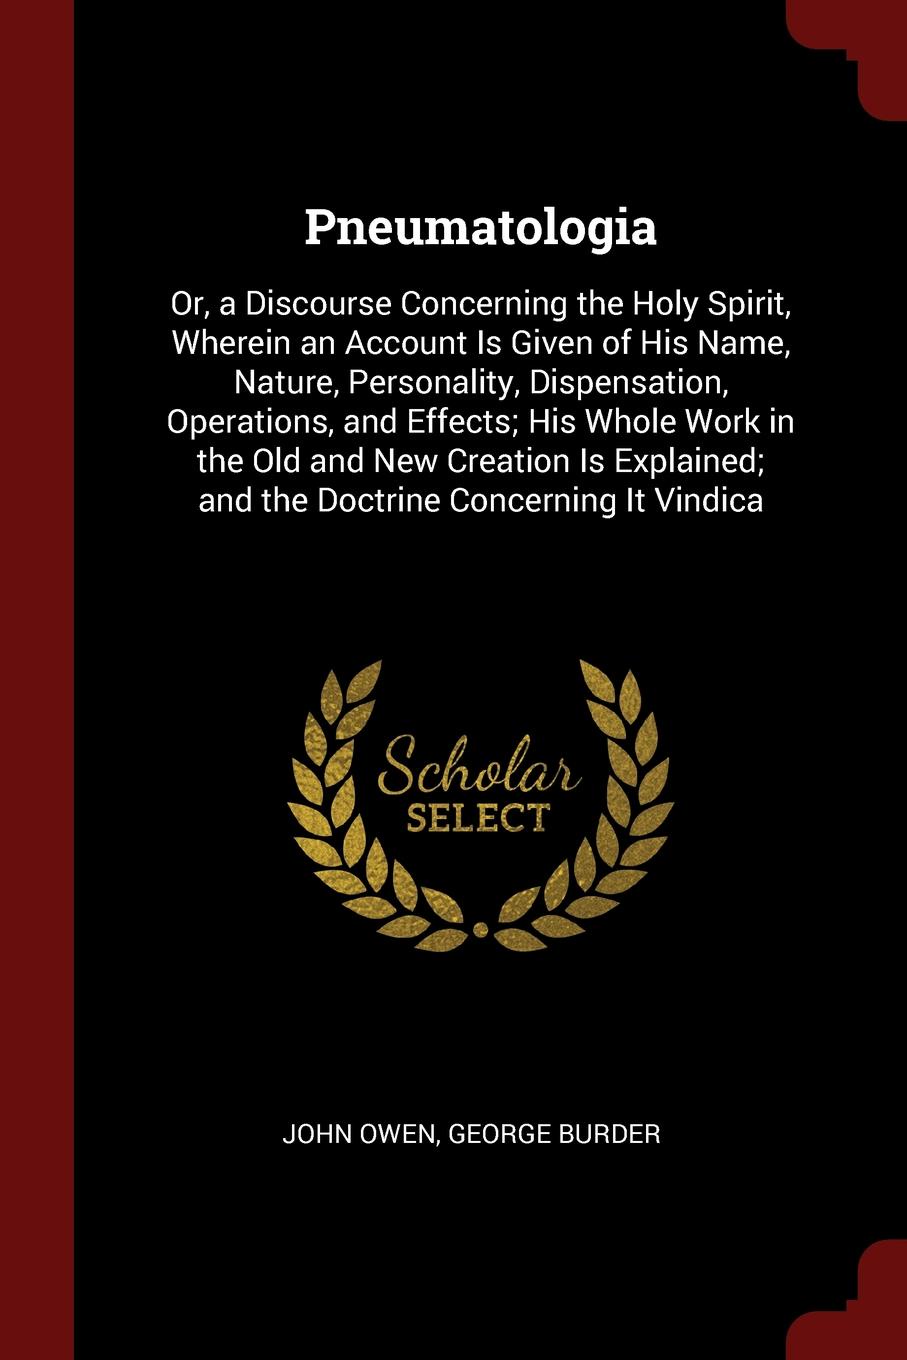 Pneumatologia. Or, a Discourse Concerning the Holy Spirit, Wherein an Account Is Given of His Name, Nature, Personality, Dispensation, Operations, and Effects; His Whole Work in the Old and New Creation Is Explained; and the Doctrine Concerning It...